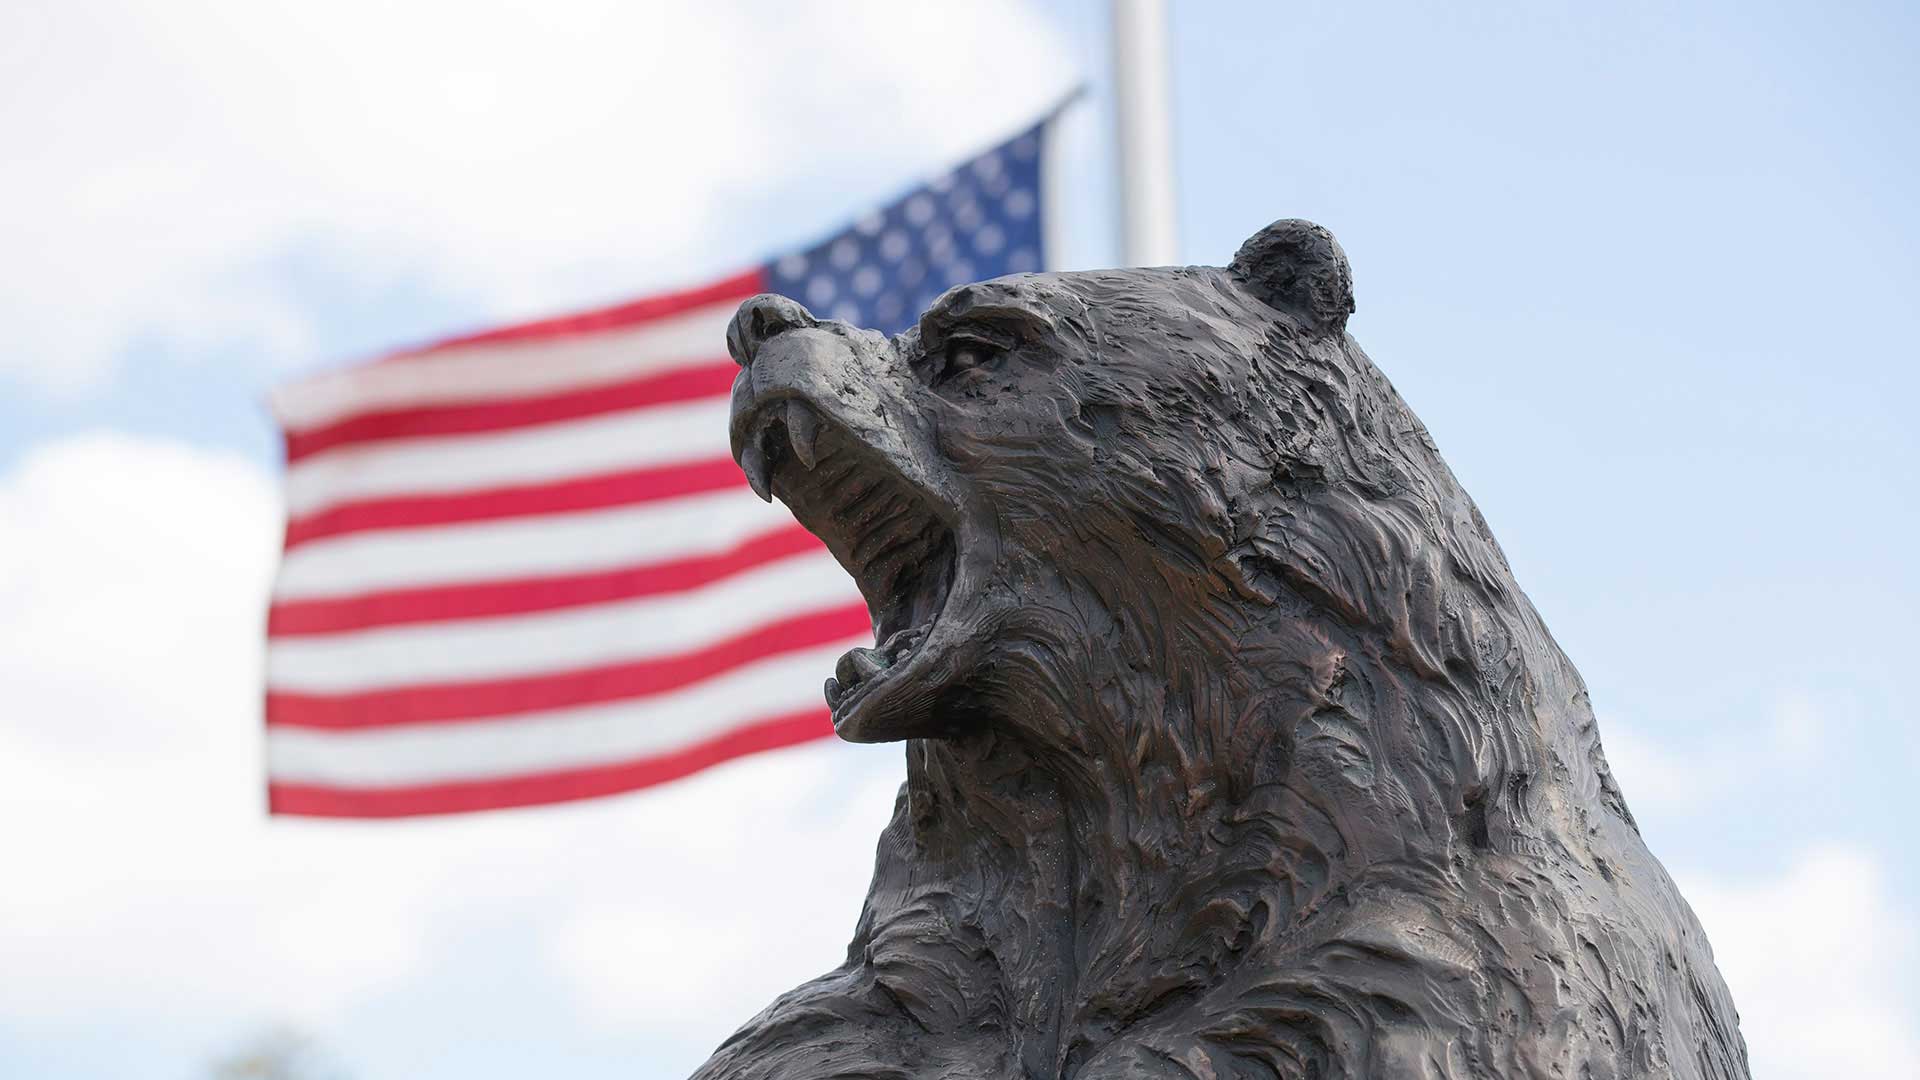 Statue of bear with American flag in background